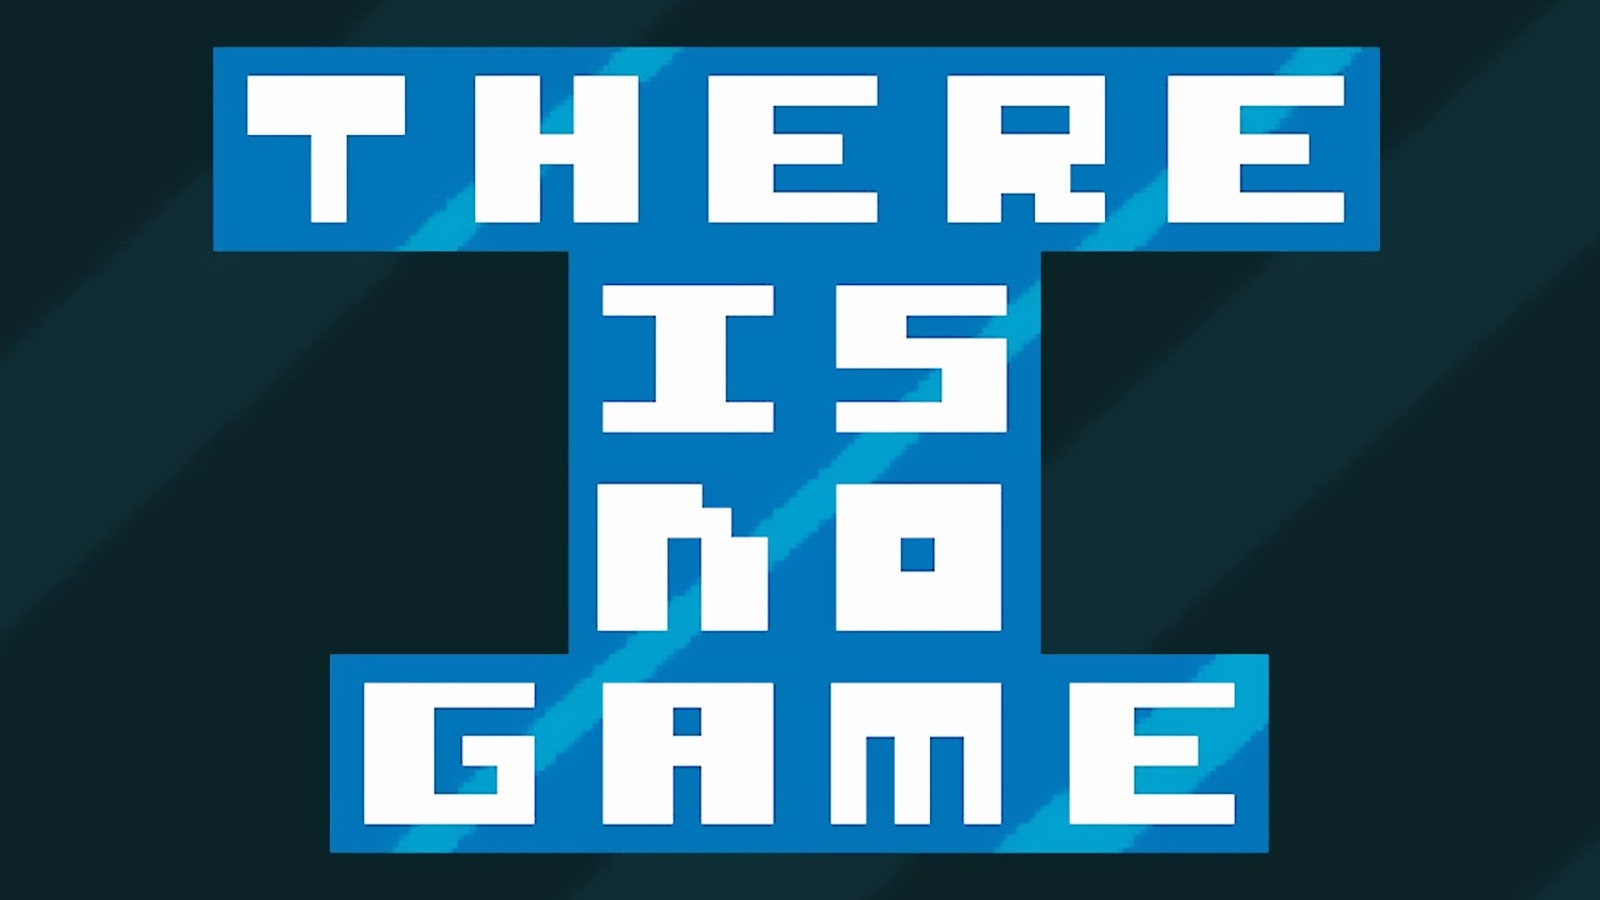 Про игру тут. There is no game. There is not game. Здесь нет игры игра. This is not a game.